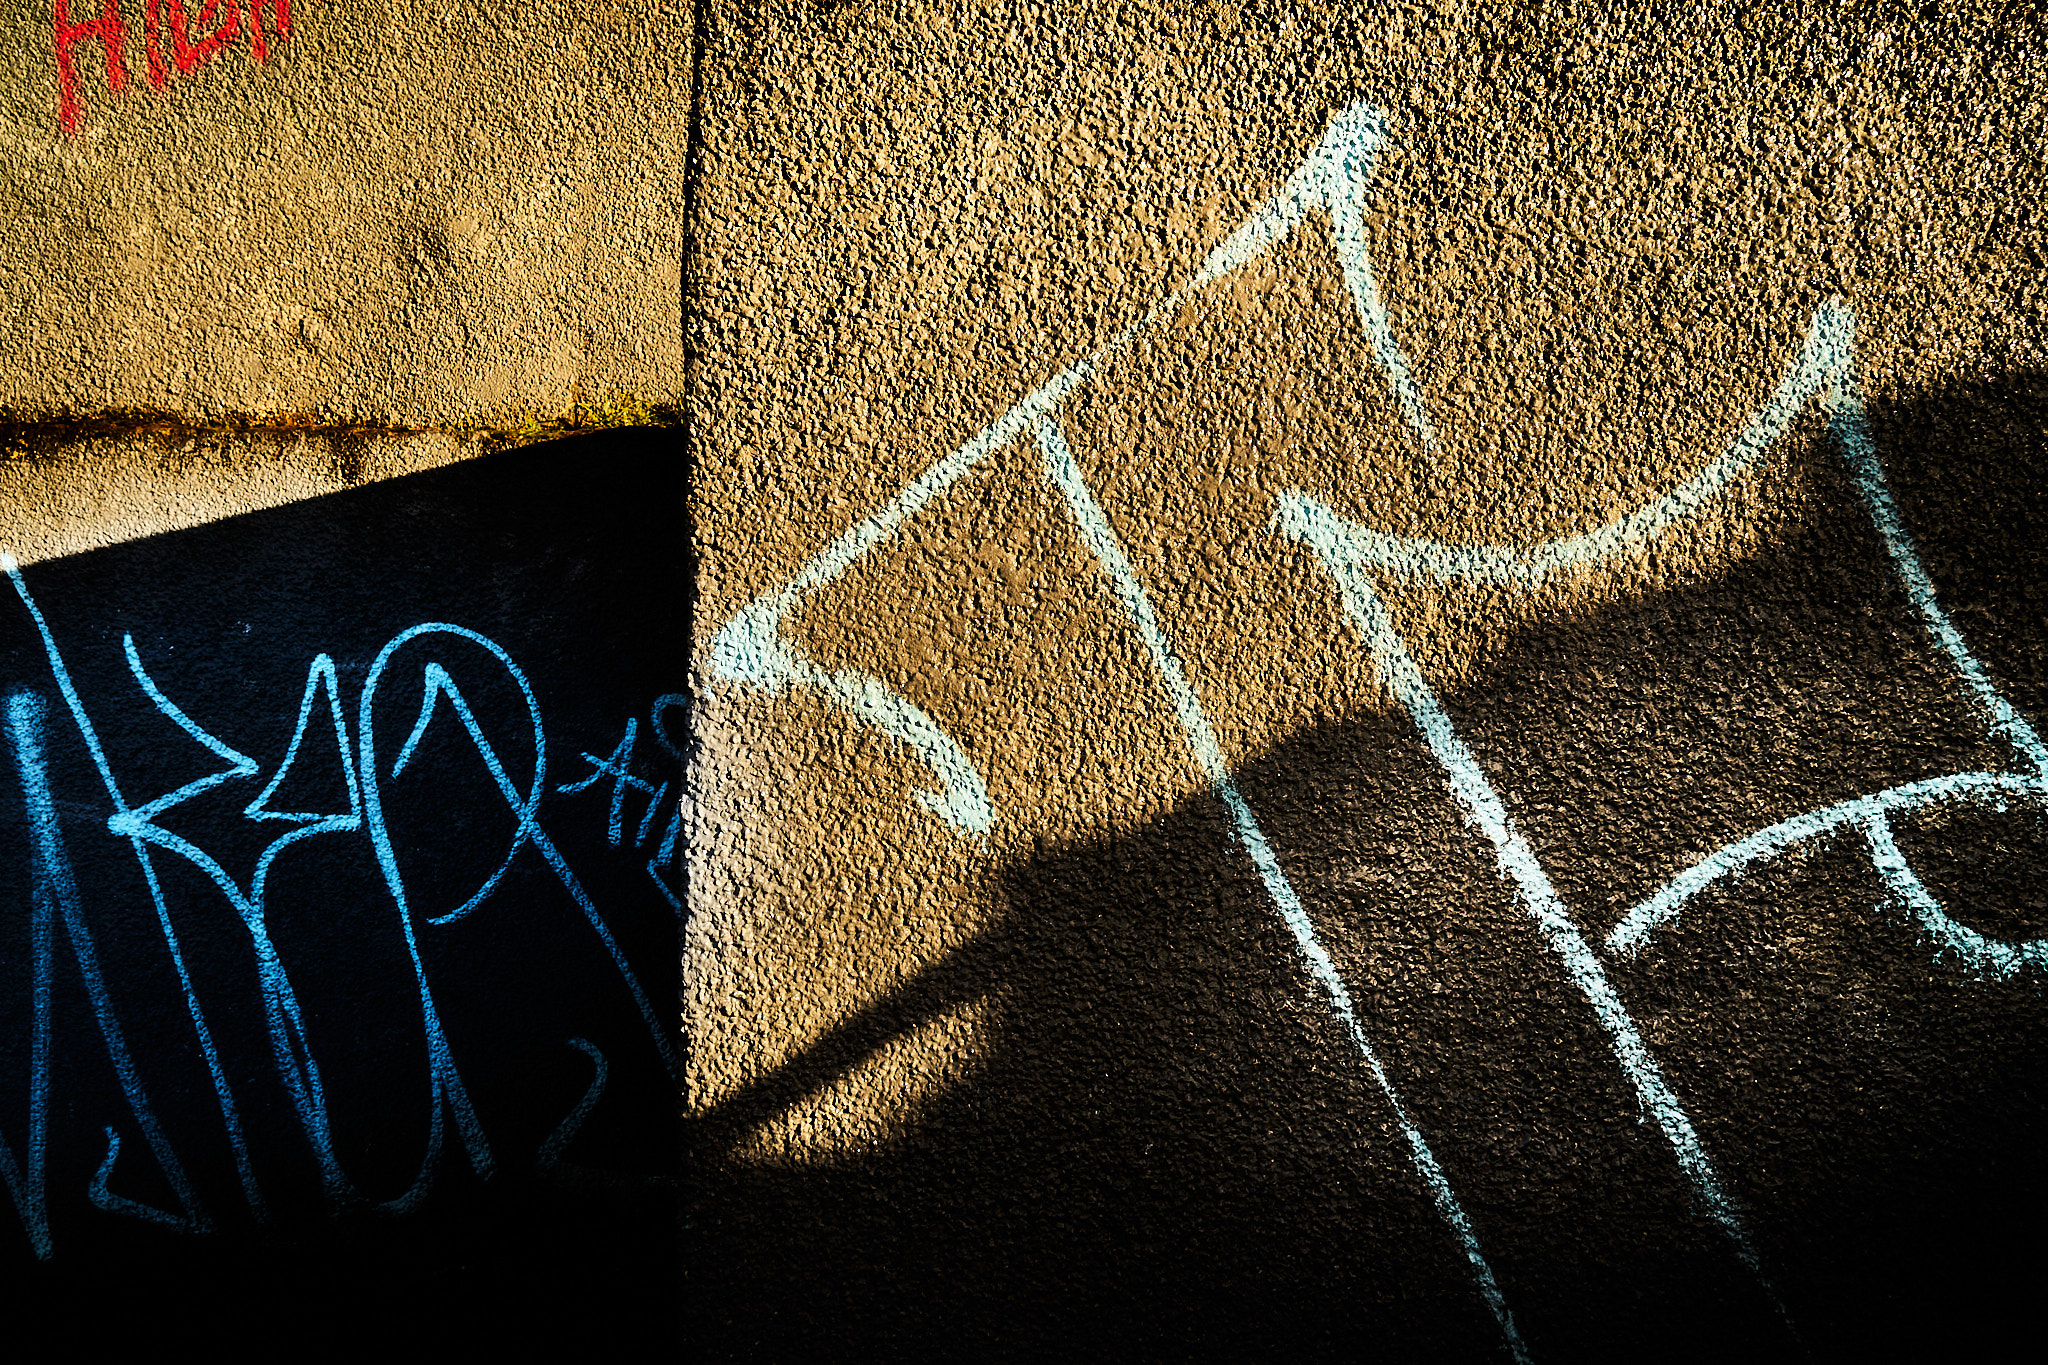 Graffiti in shadows and color...